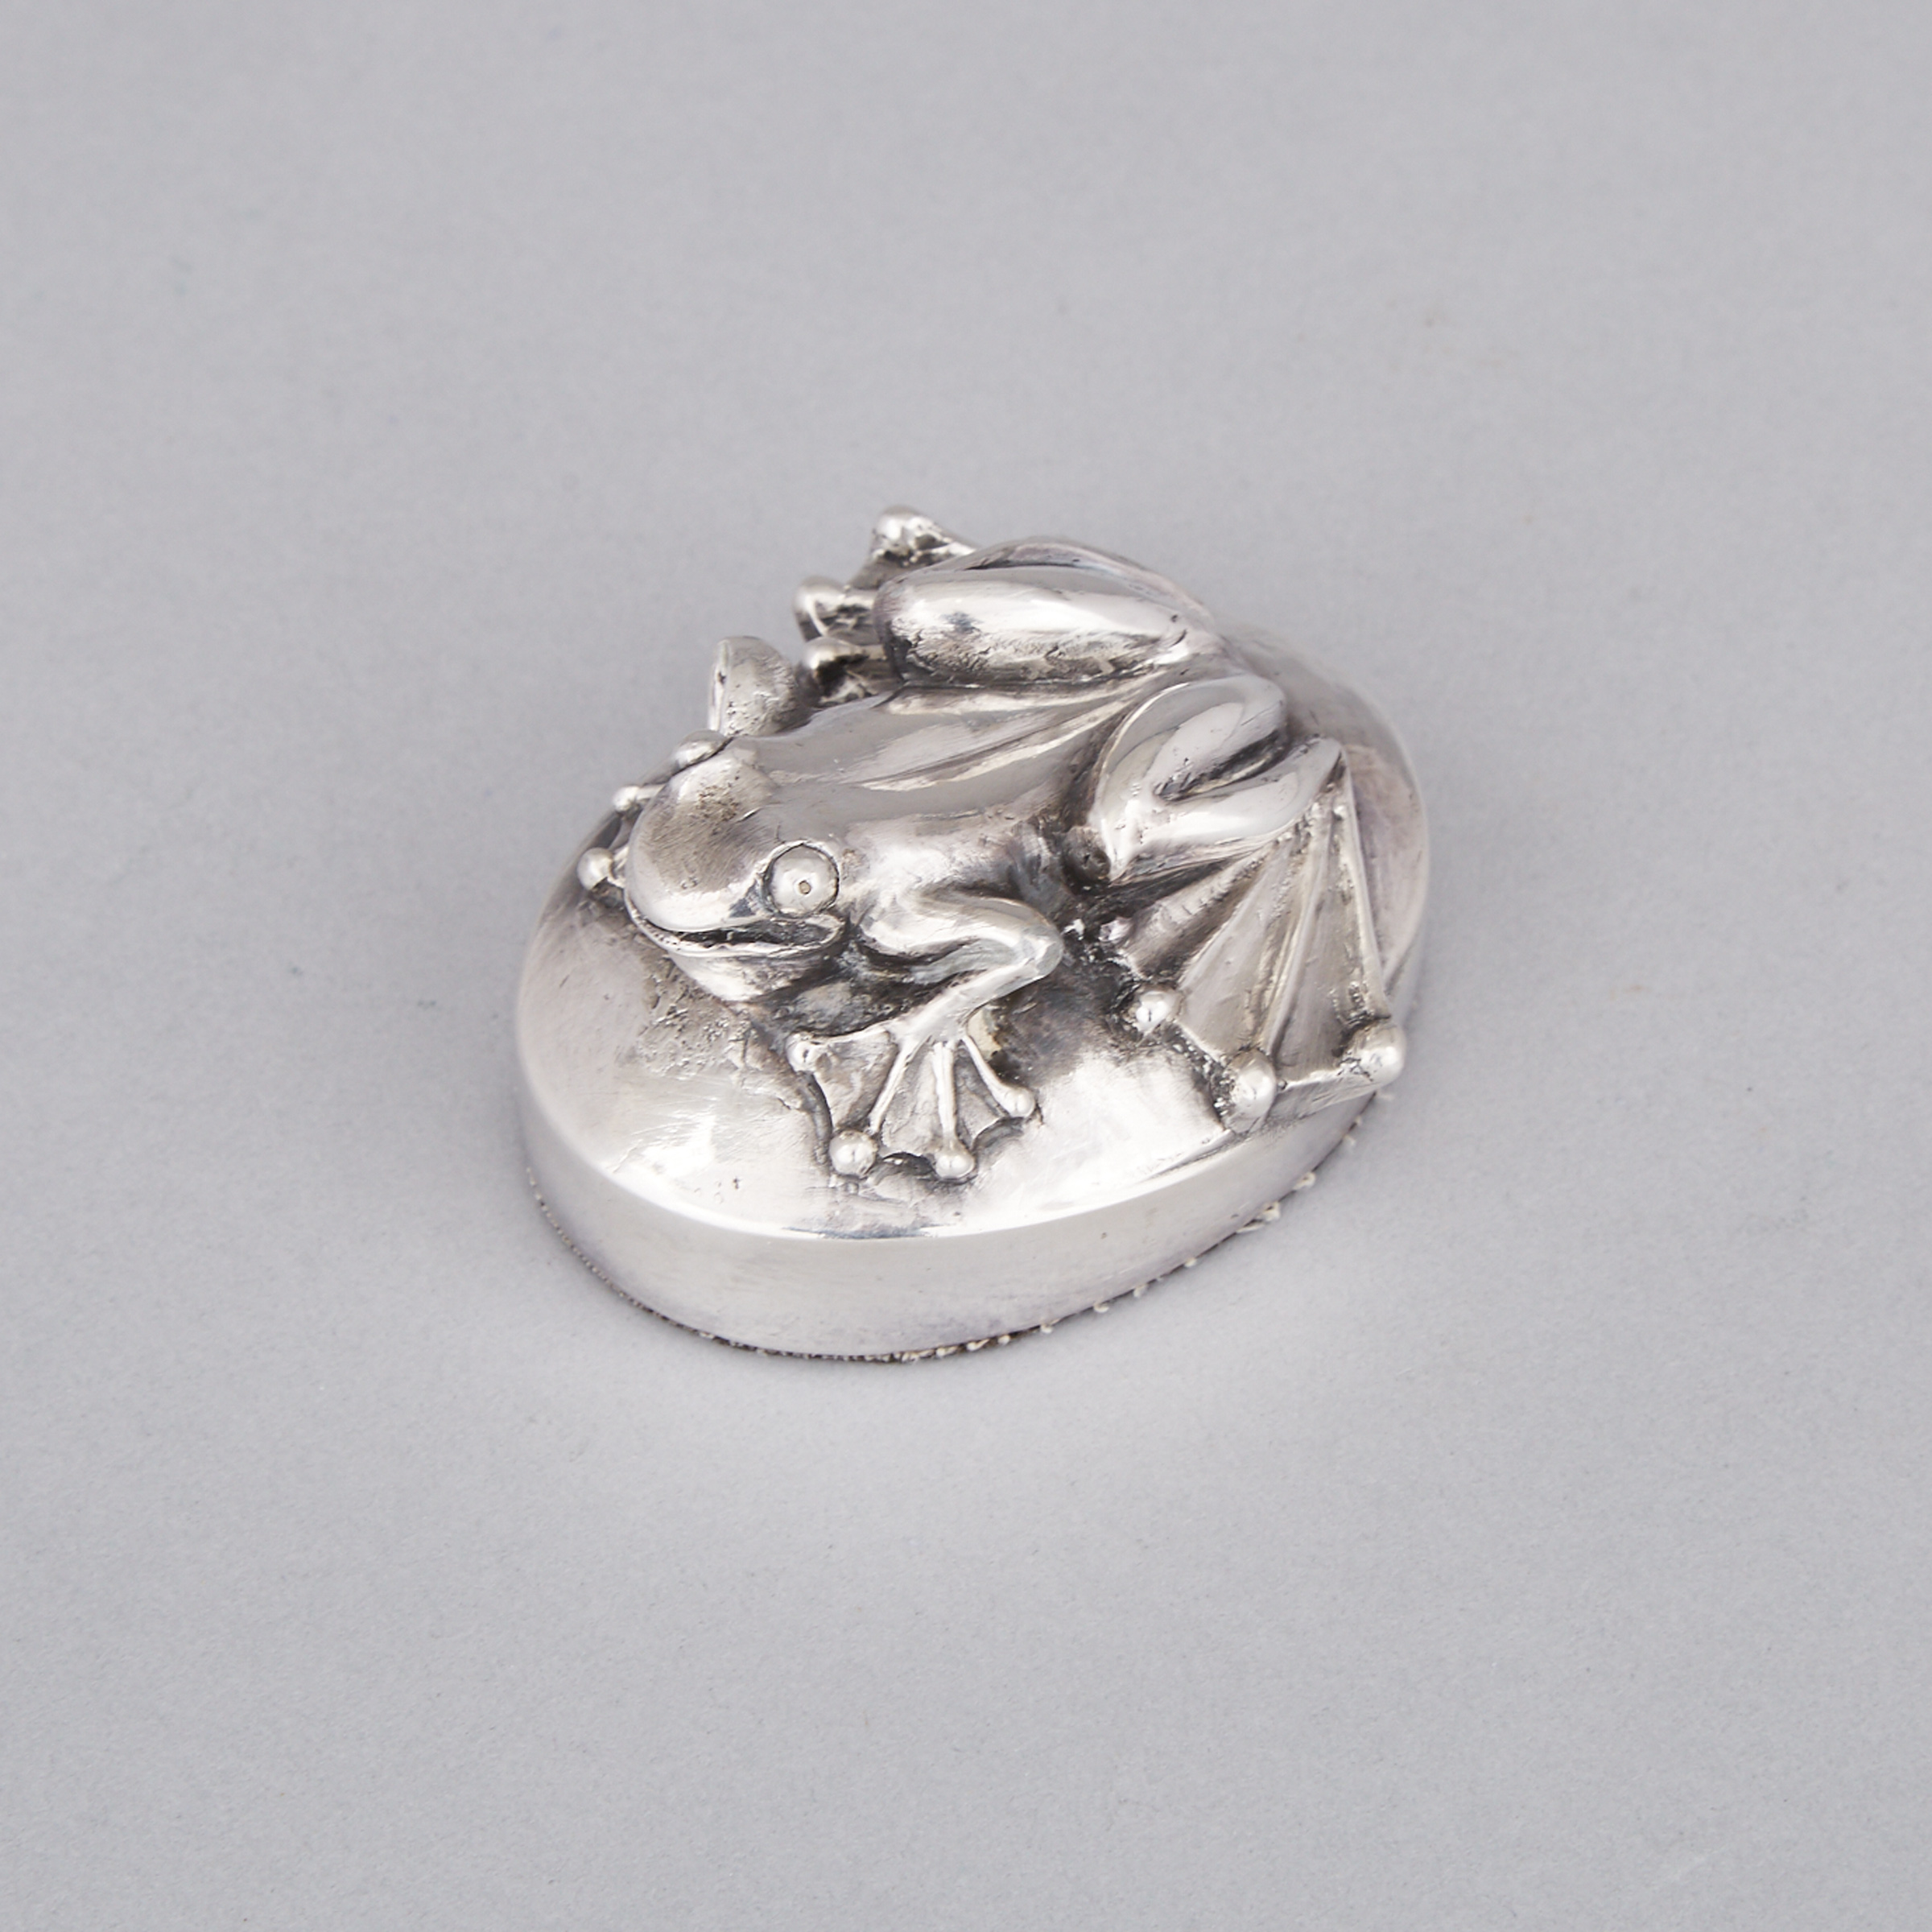 Continental Silver Frog Paperweight, 20th century